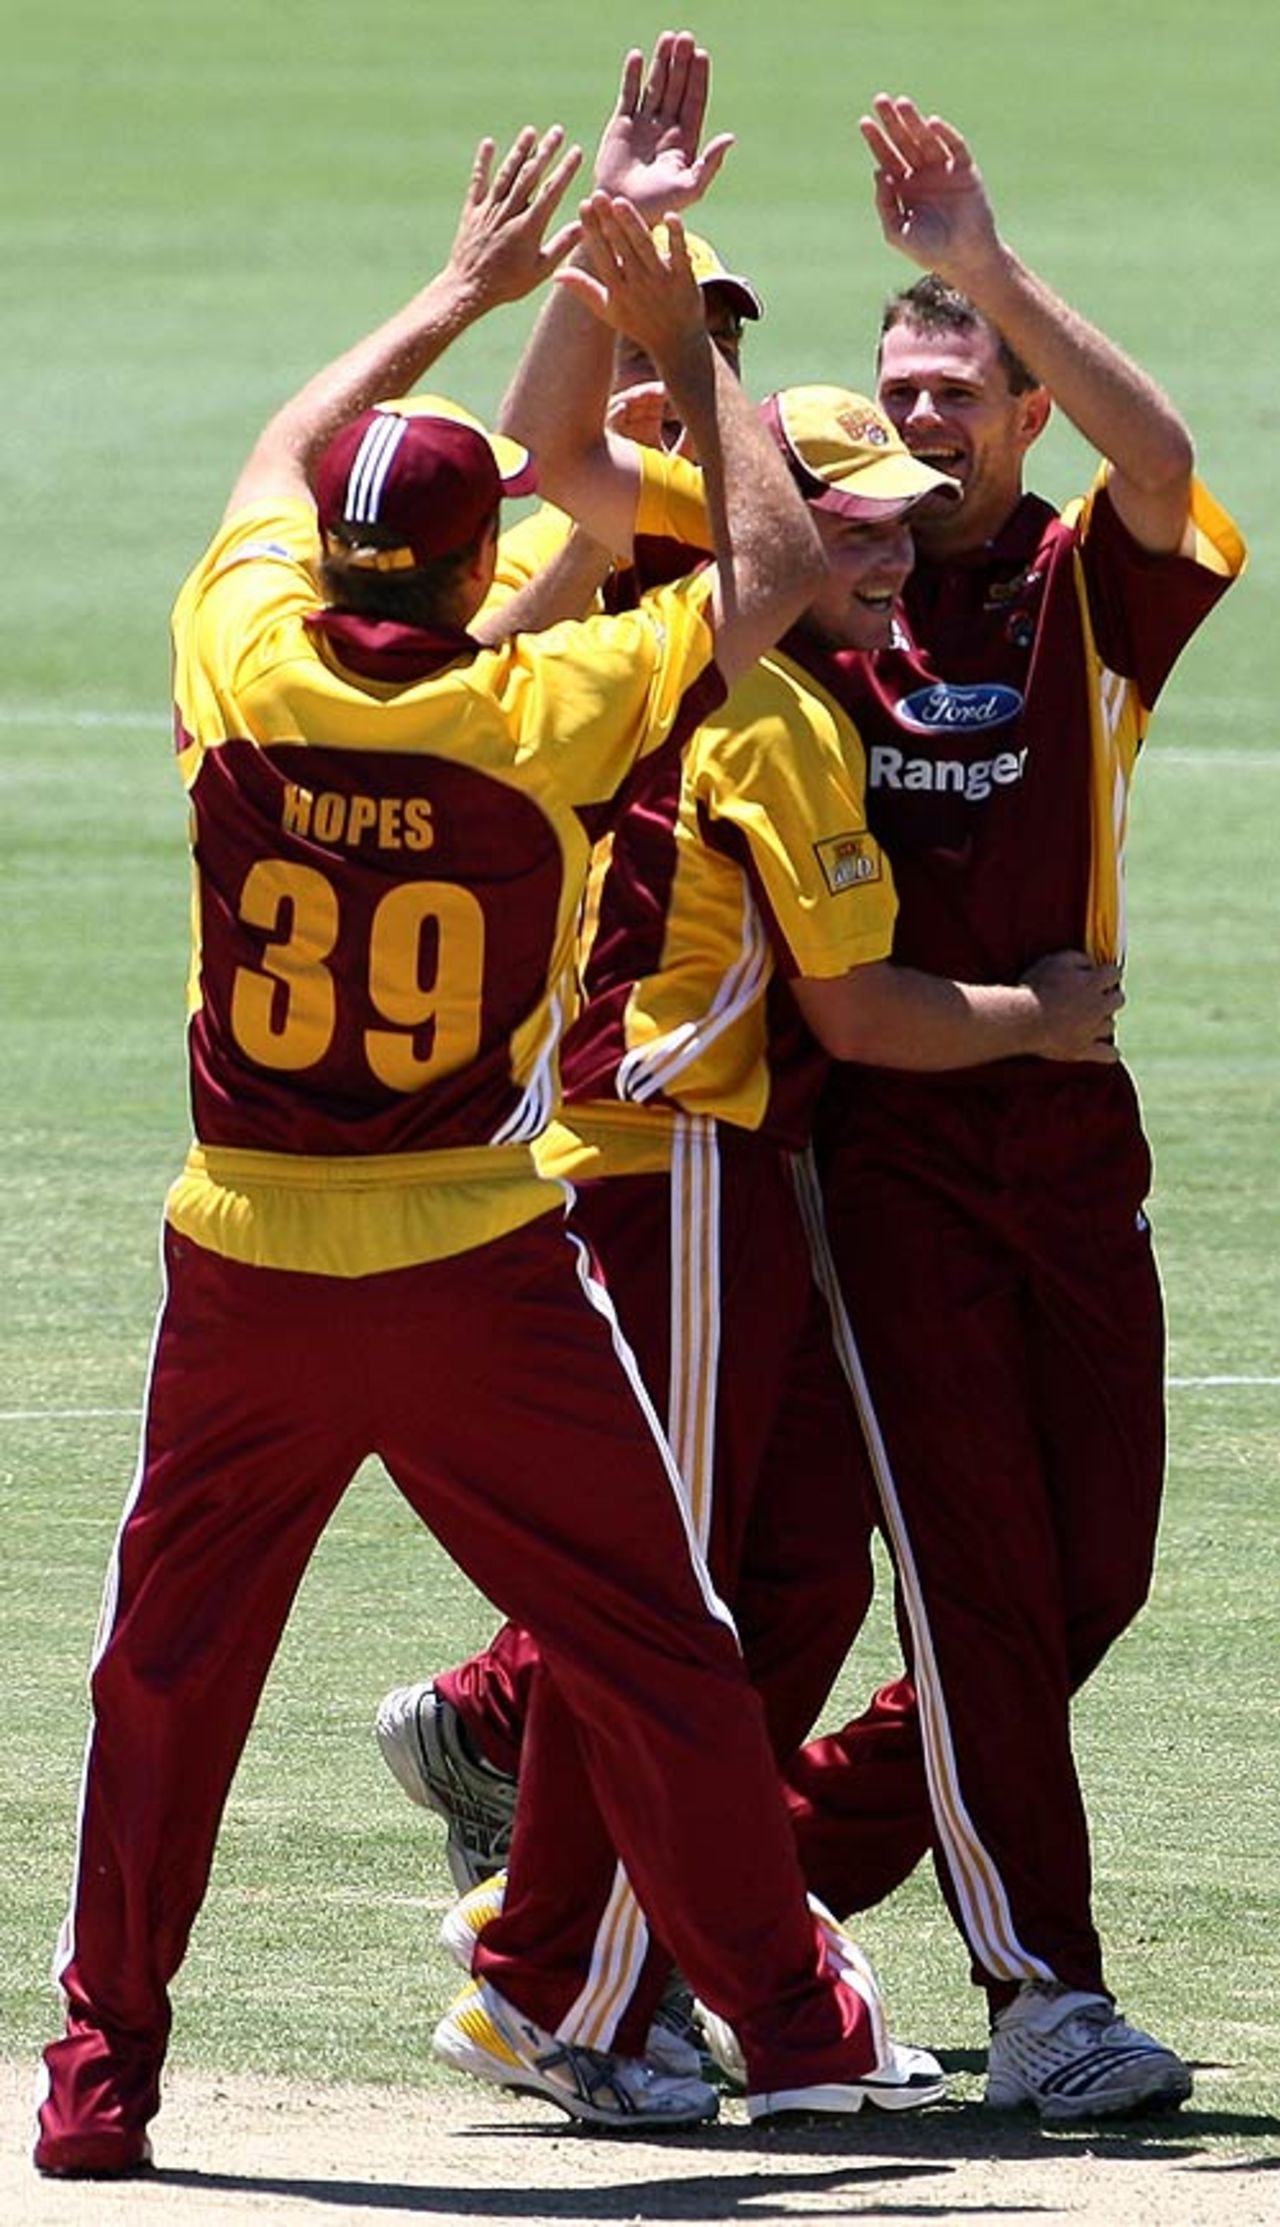 Chris Swan's team-mates congratulate him on one of his four wickets on debut, Western Australia v Queensland, FR Cup, Perth, November 14, 2007